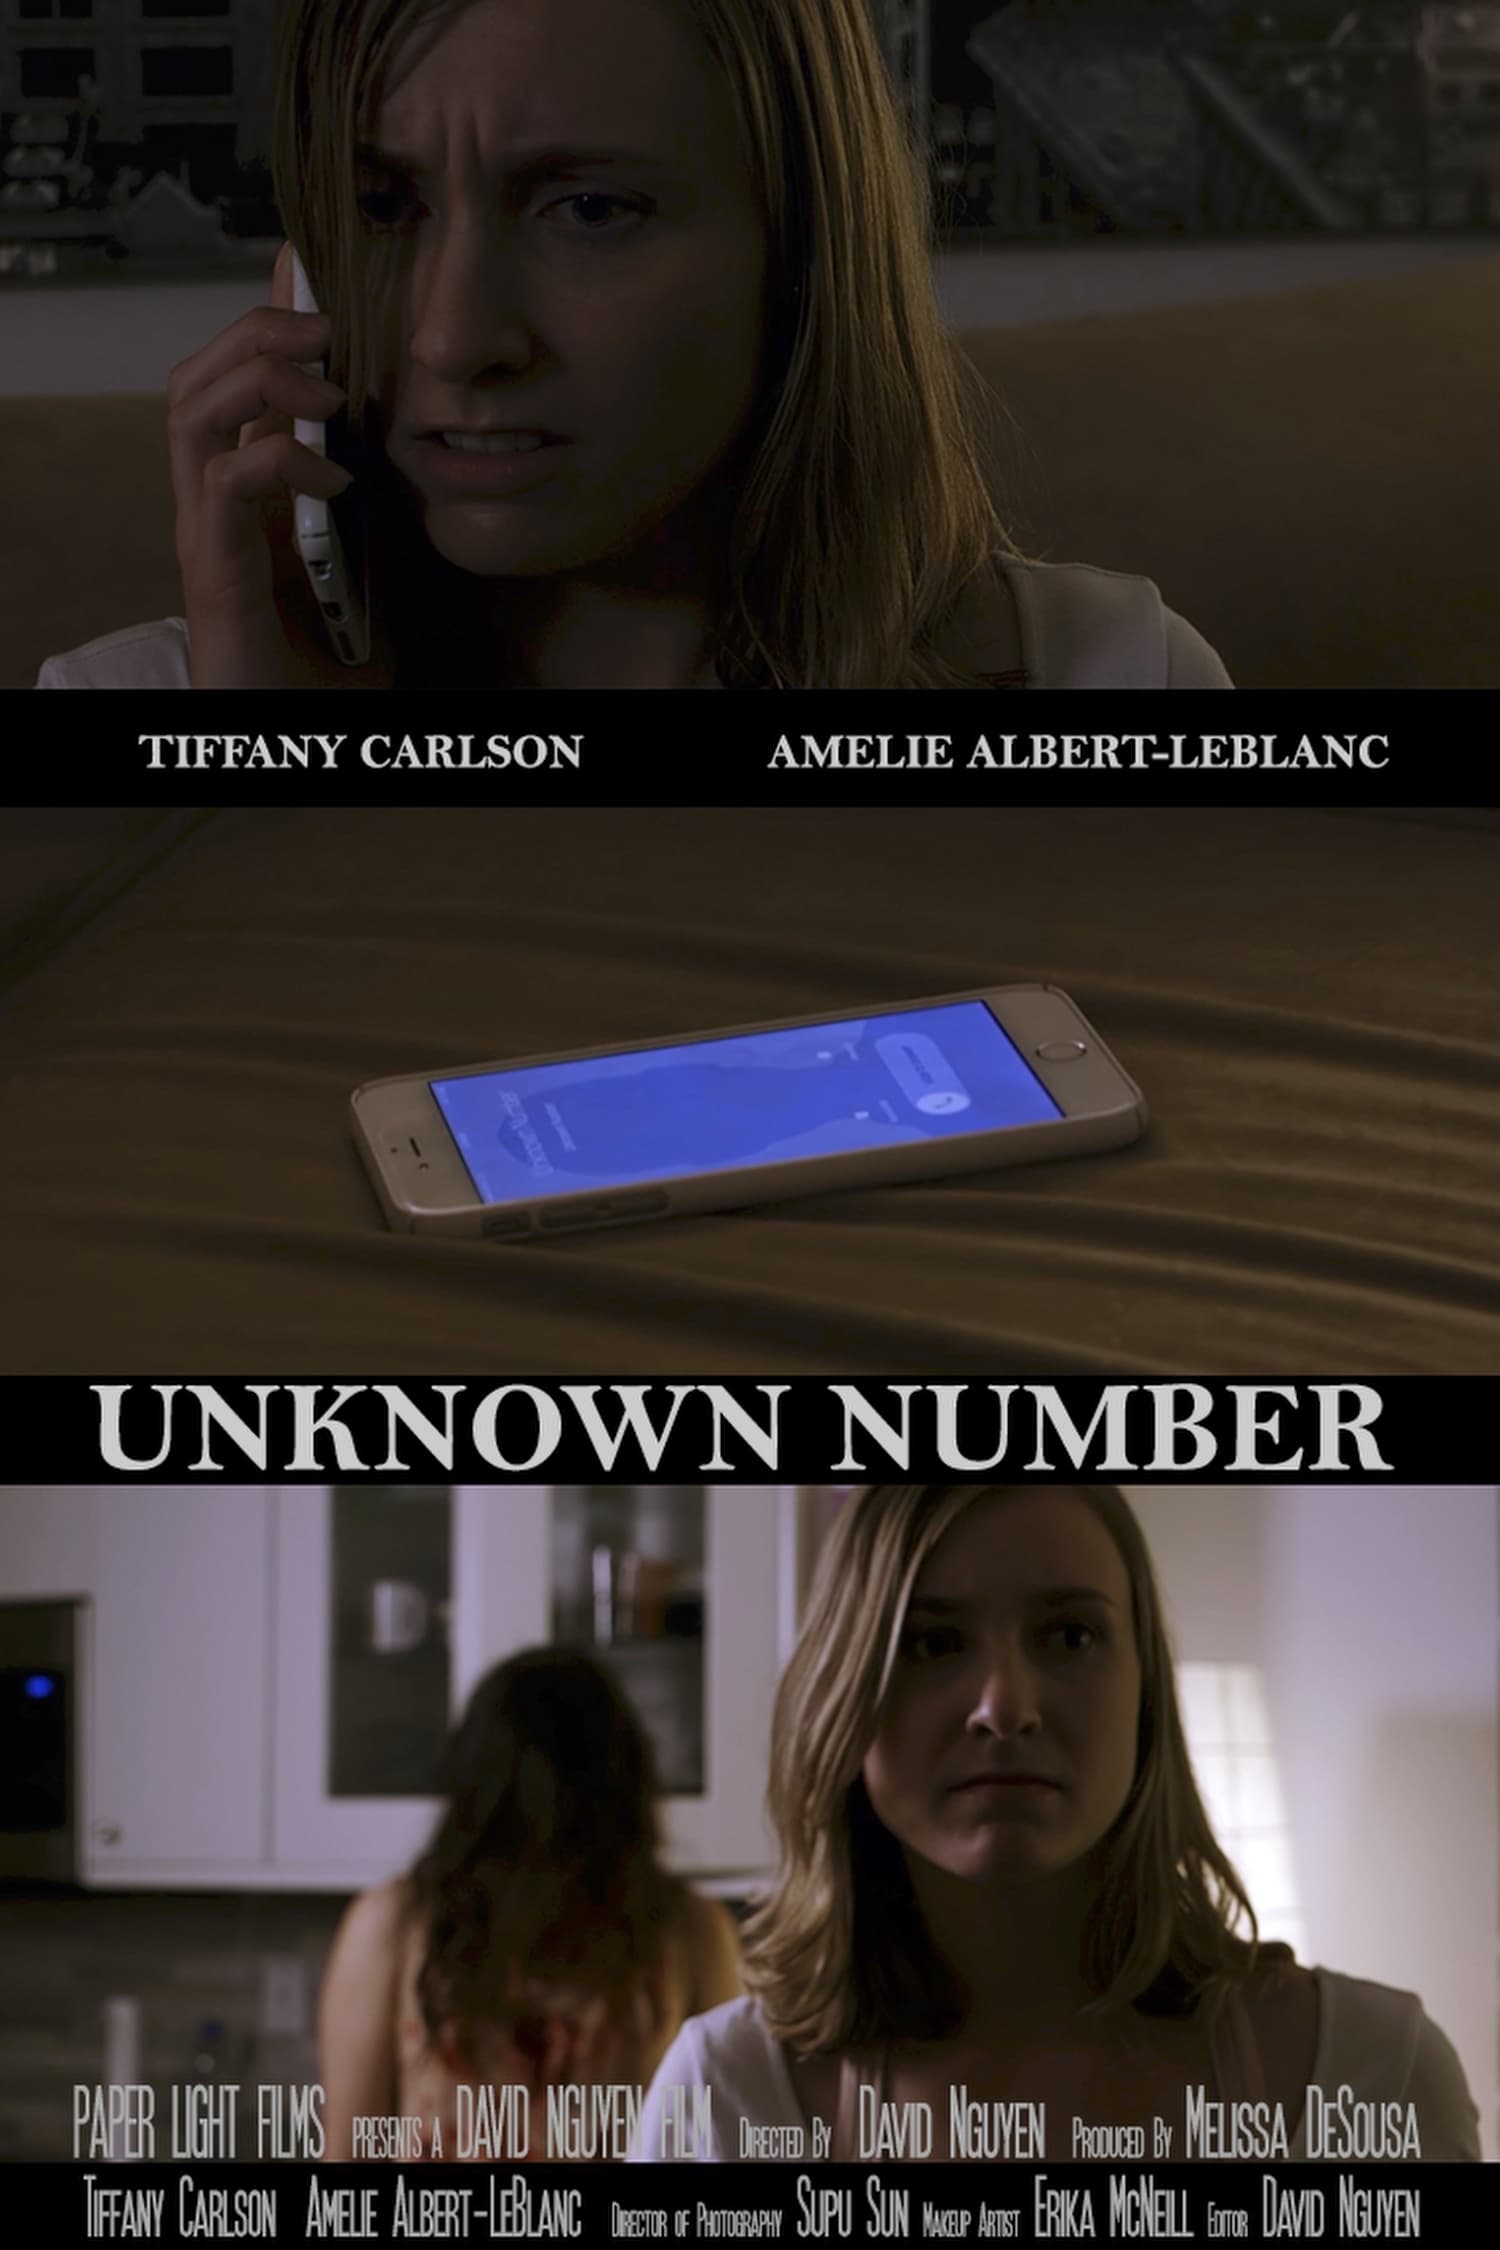 Unknown Number (2016)